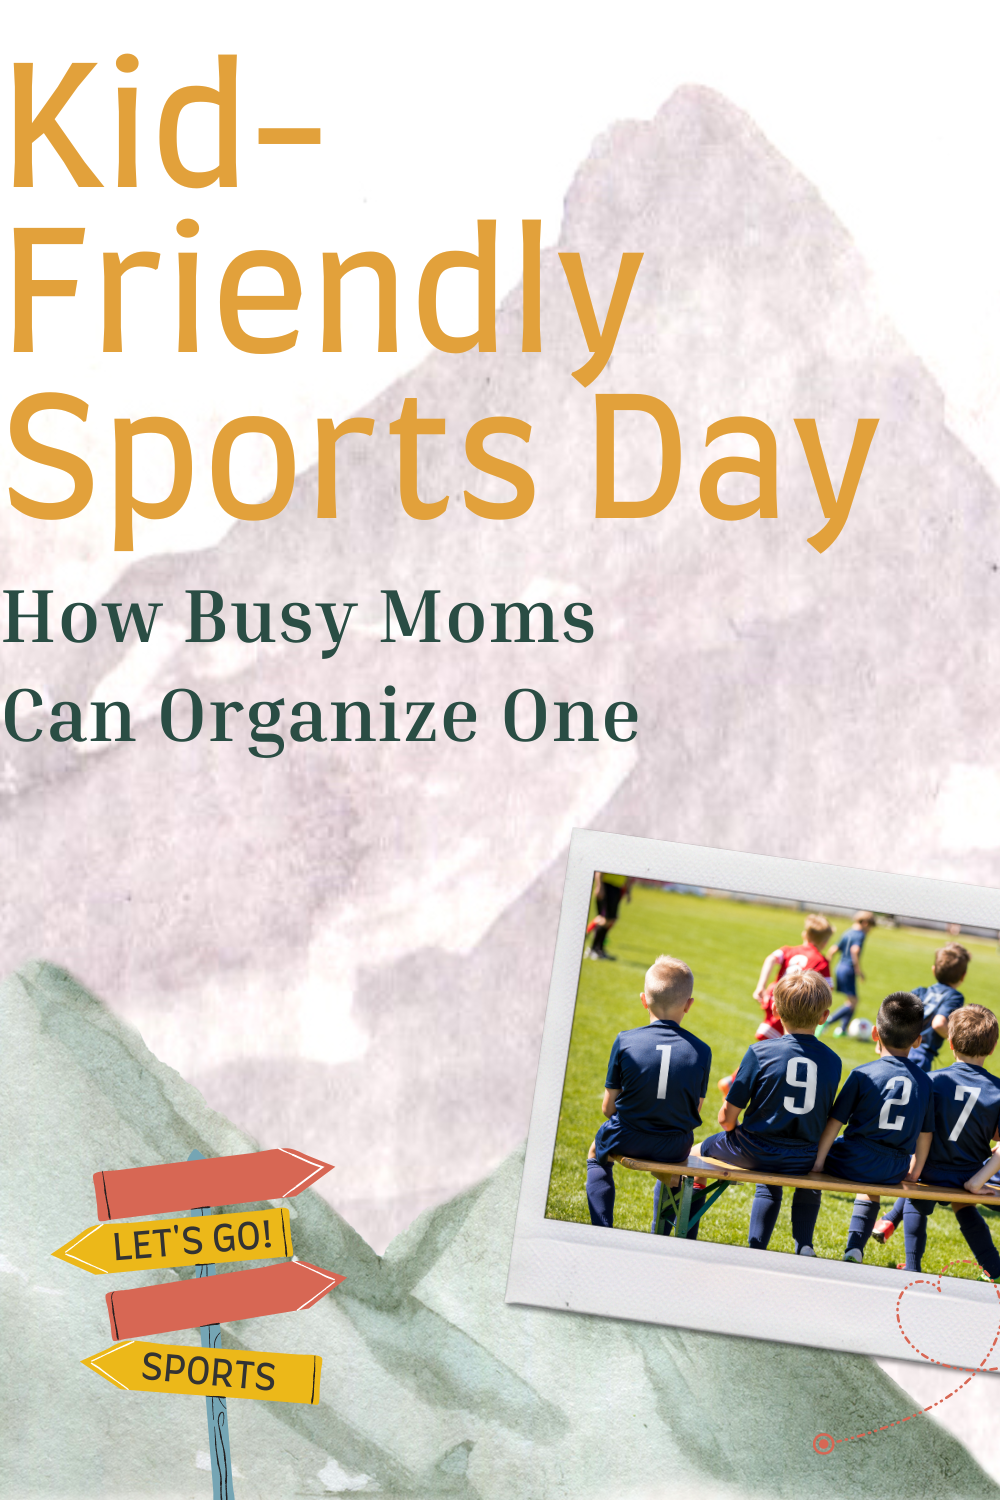 As you can imagine, organizing a sports day is far easier said than done, but it doesn’t have to be horribly difficult to achieve. As long as you’re prepared and organized, you can put something together that will be fun for everyone involved.